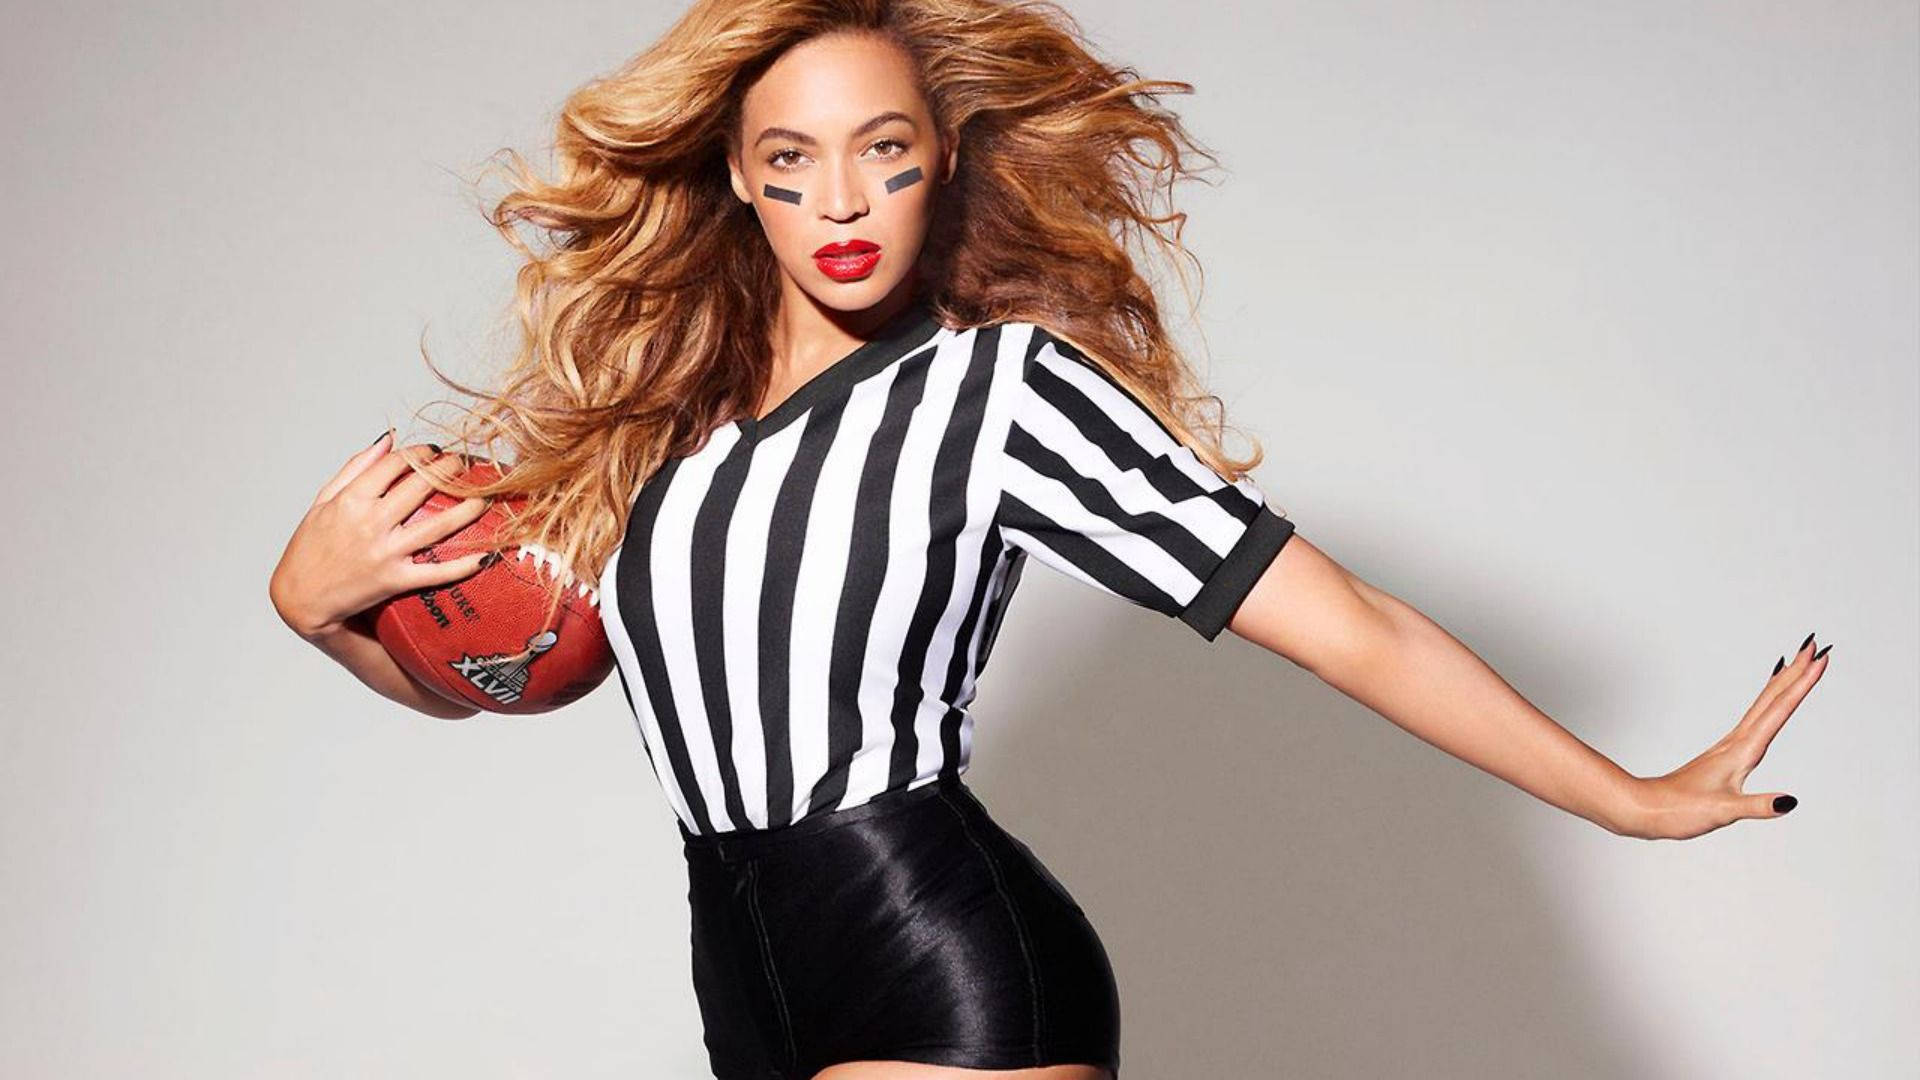 Beyonce Rocks An American Football Outfit Background